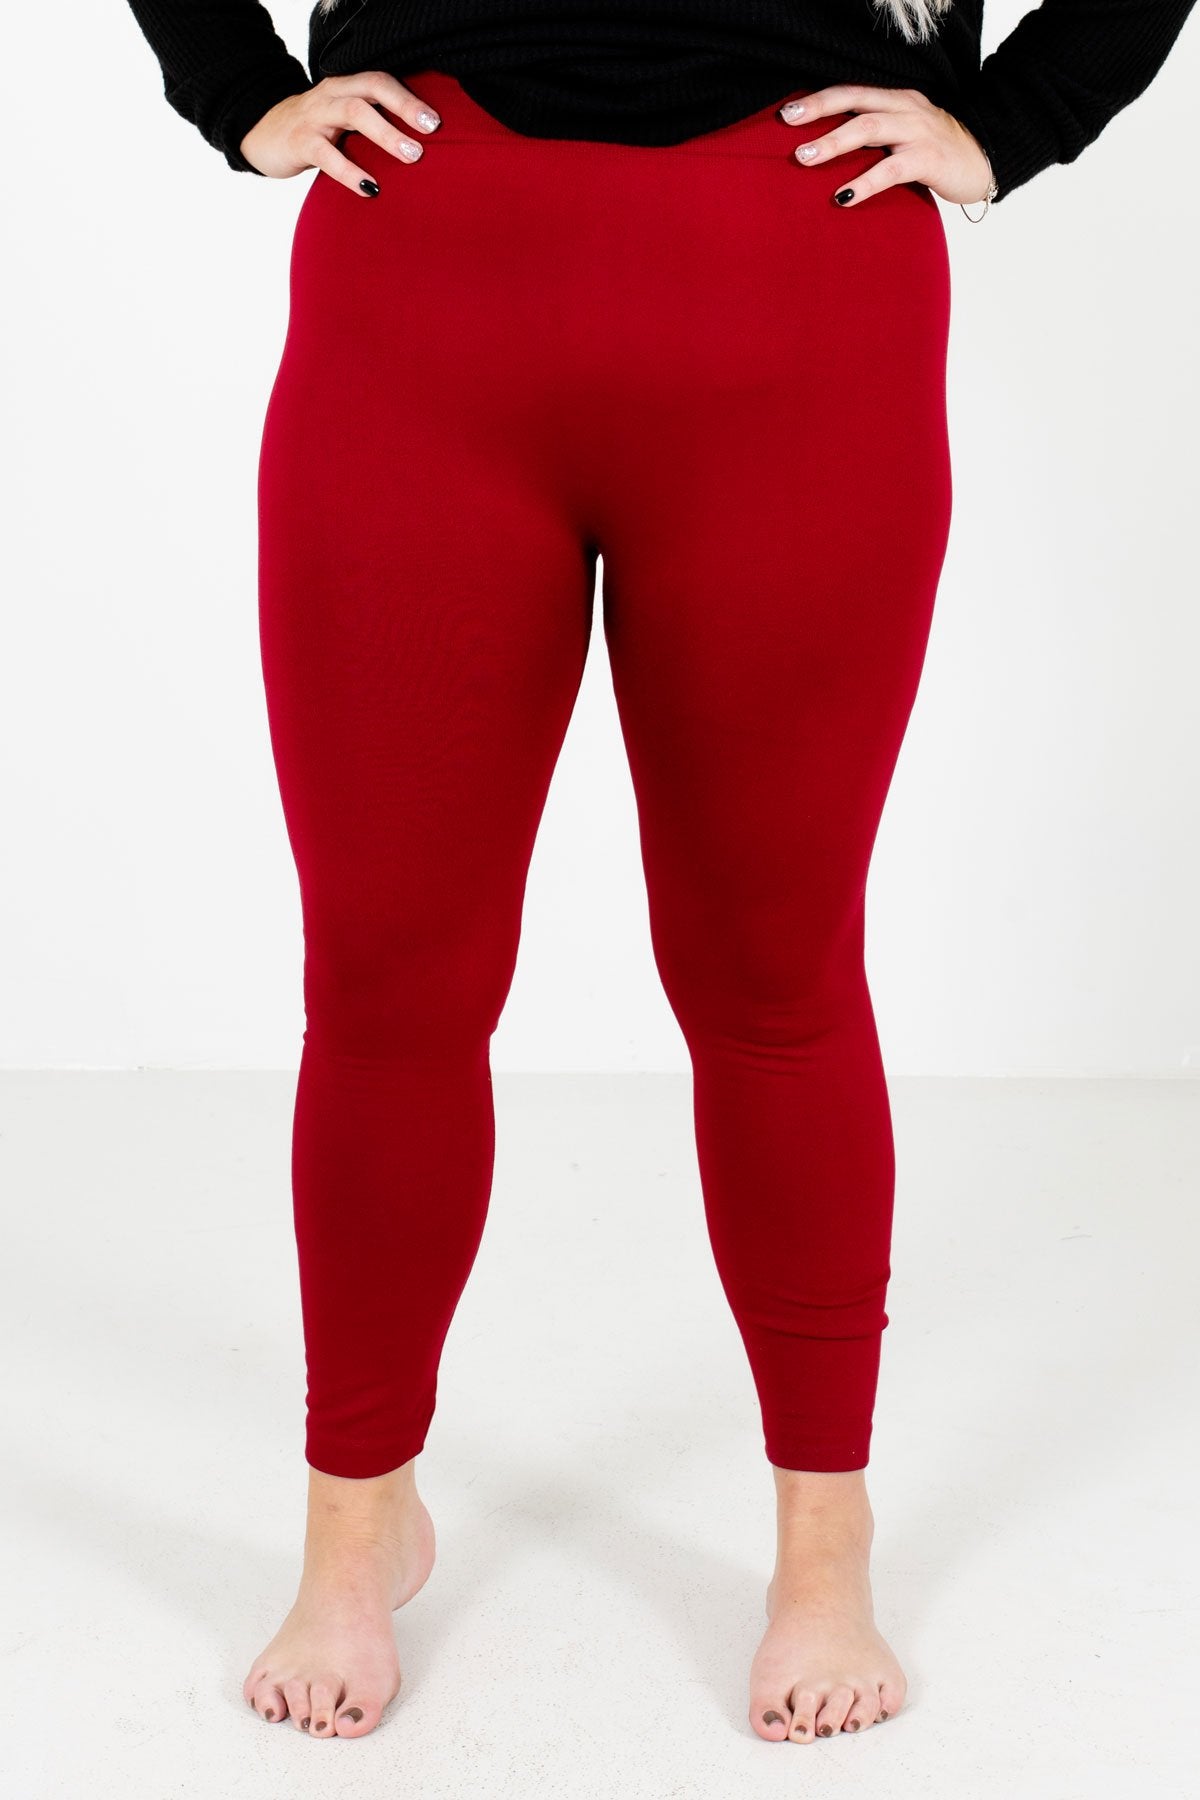 Red Skinny Slimming Fit Boutique Leggings for Women